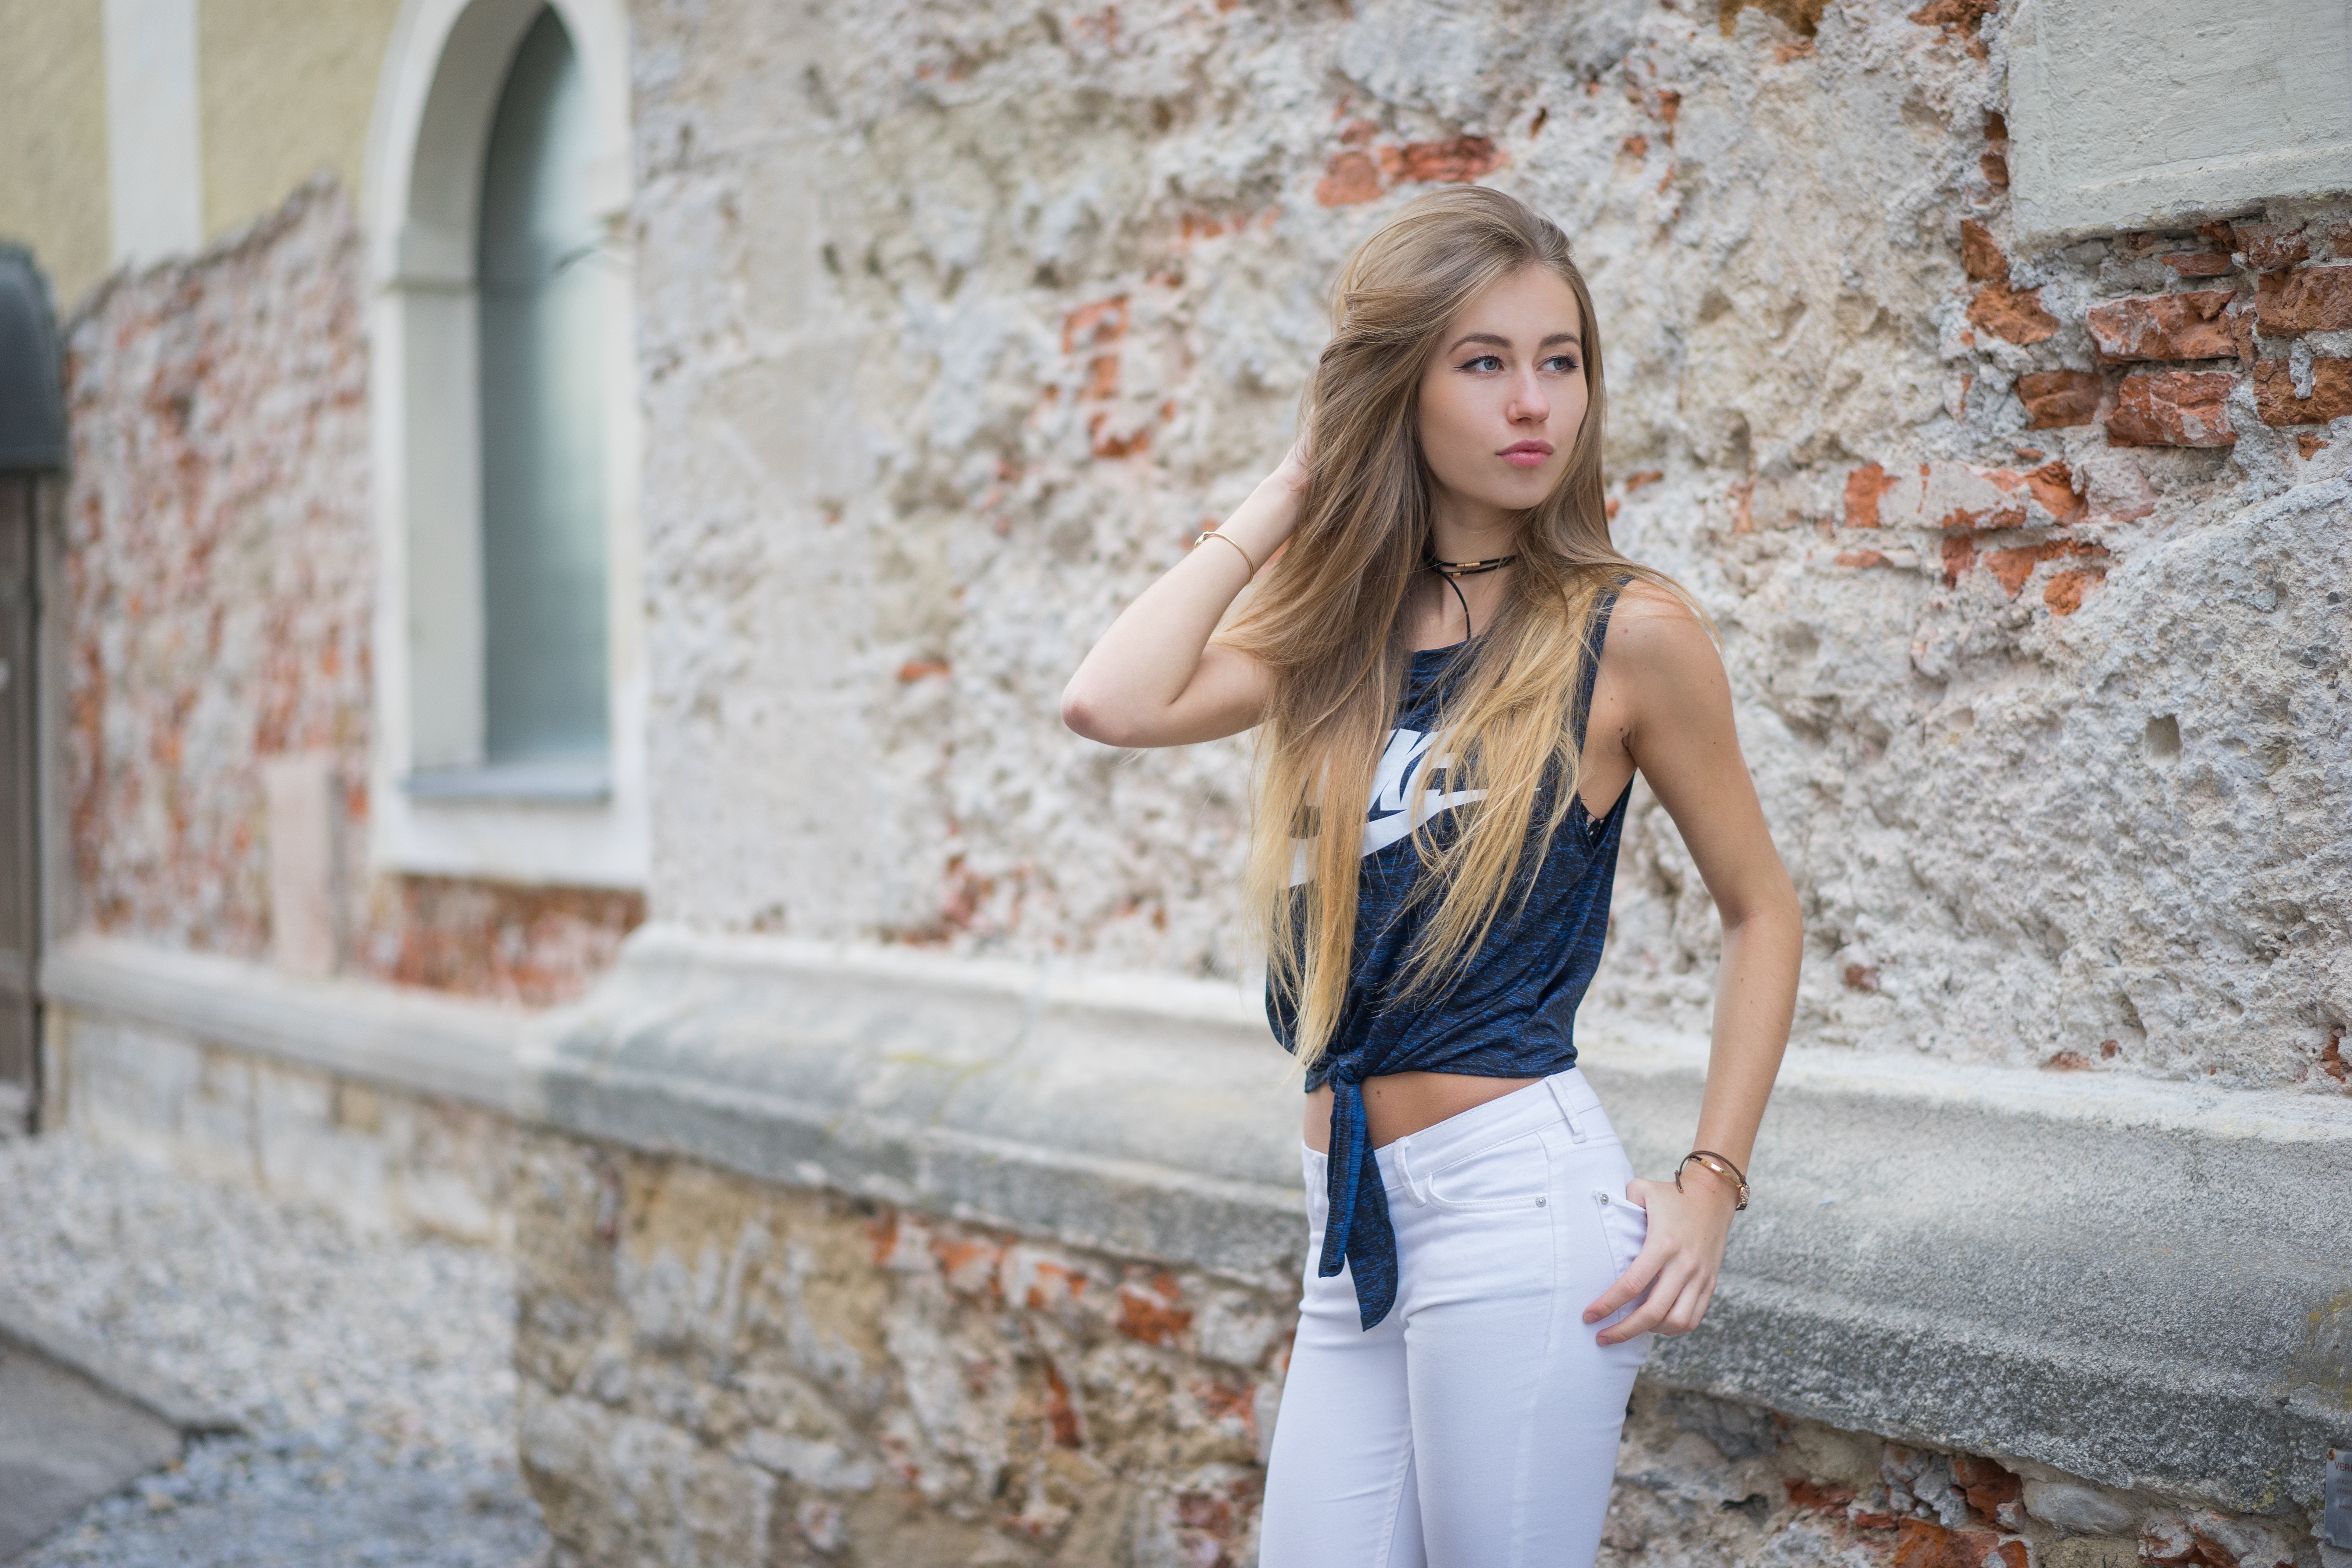 Blonde Blue Eyes Hands In Hair Blue Shirt Jeans White Clothing Nike Looking Into The Distance Women  6000x4000